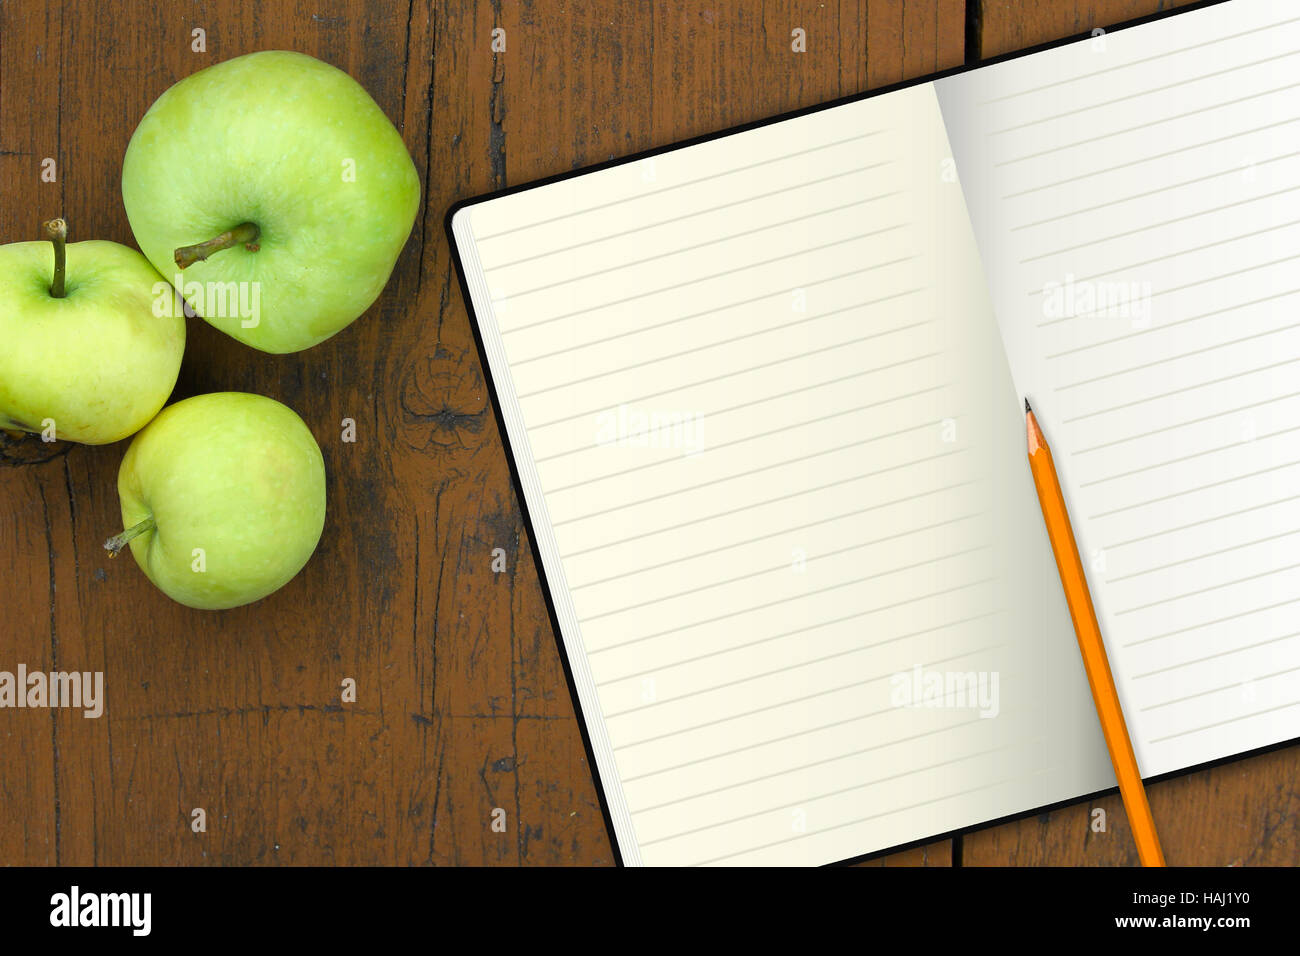 notebook with pencil and apples on a wood table Stock Photo